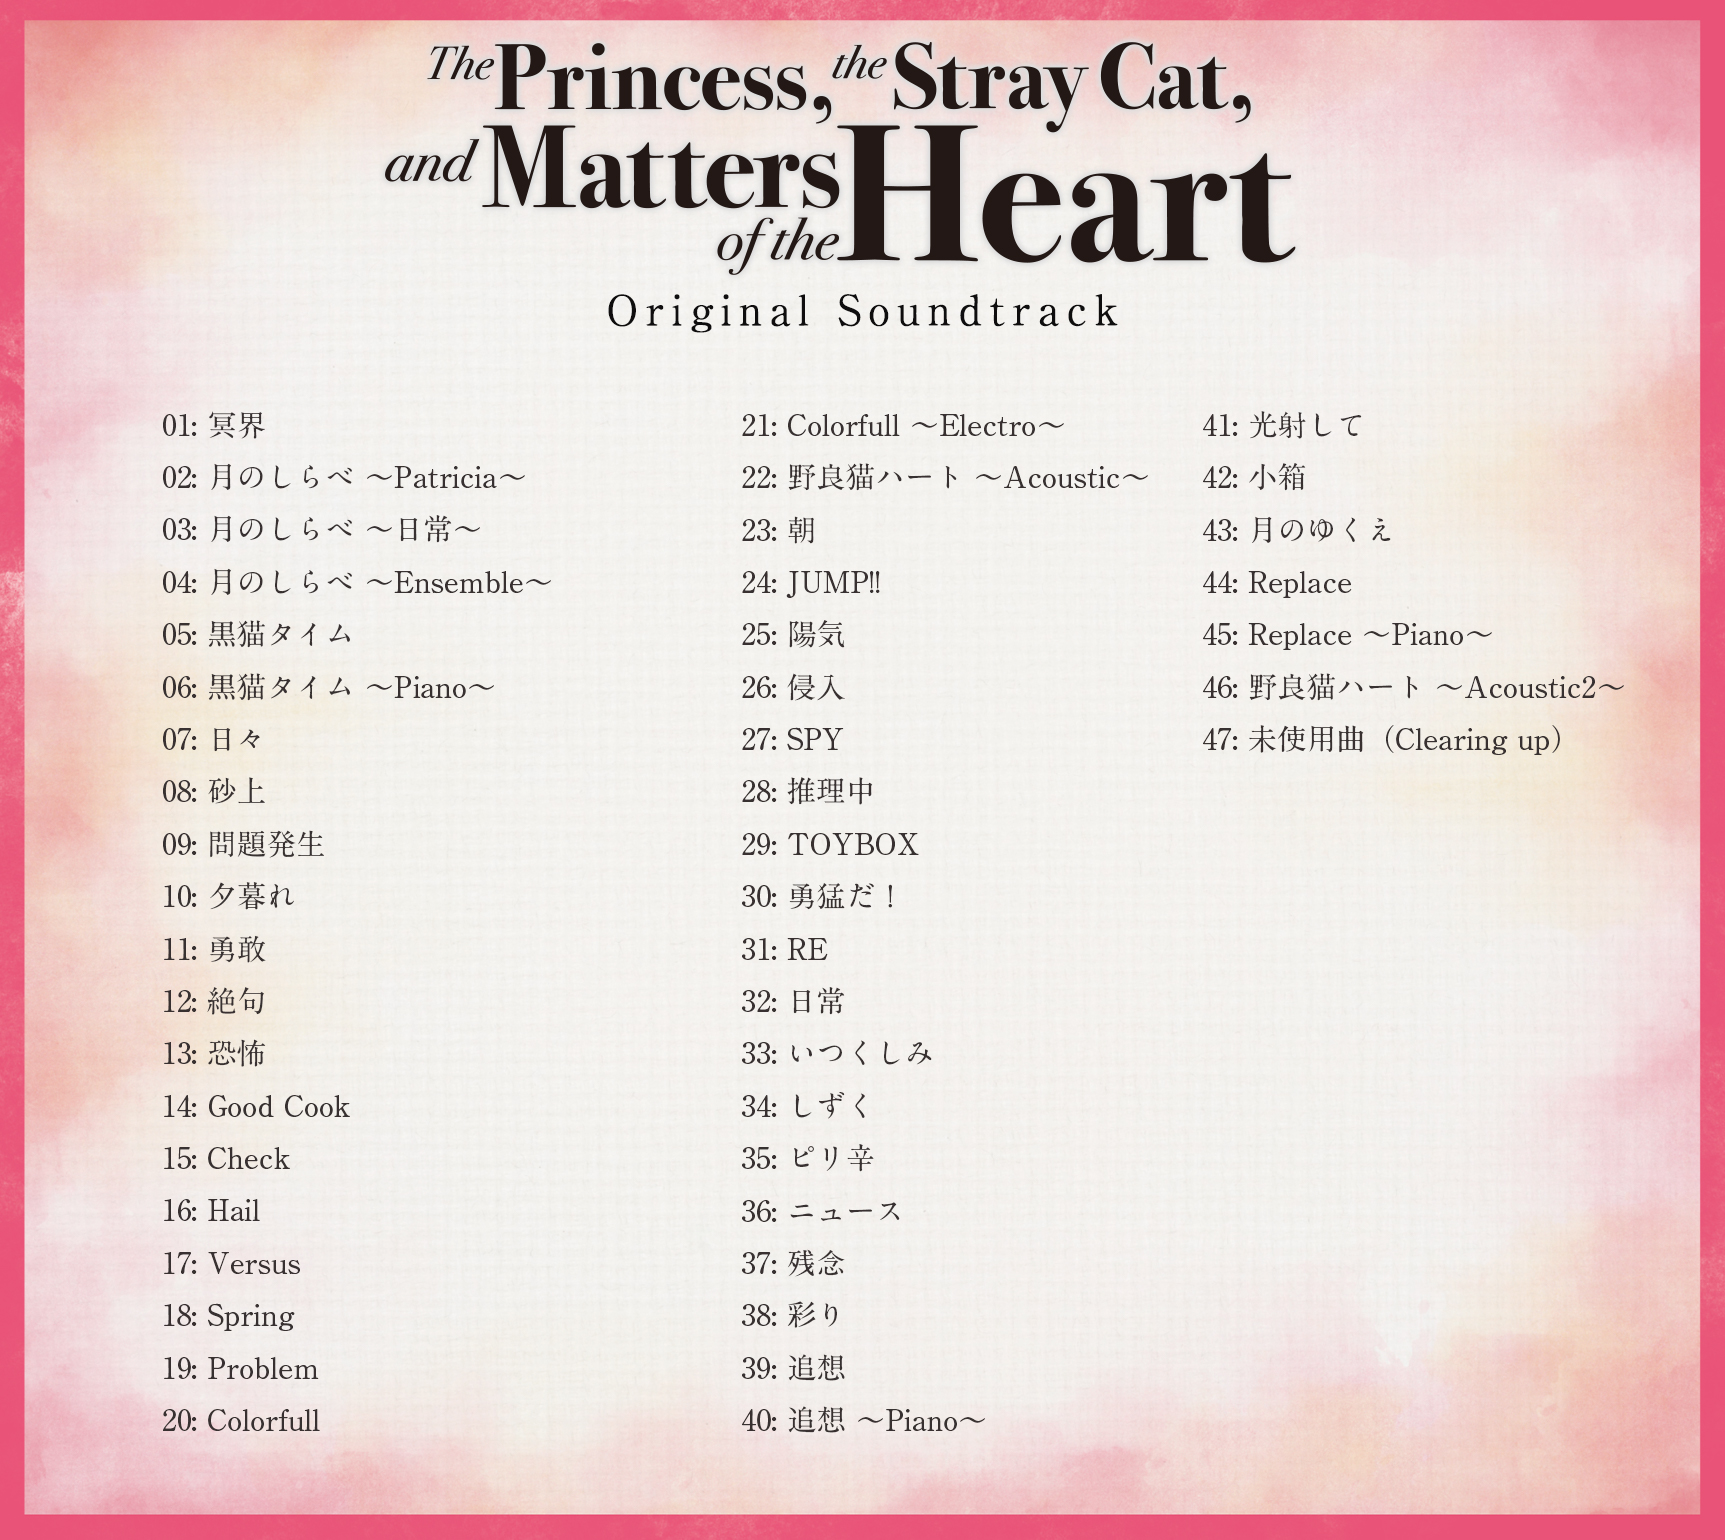 The Princess, the Stray Cat, and Matters of the Heart -Original Soundtrack- screenshot